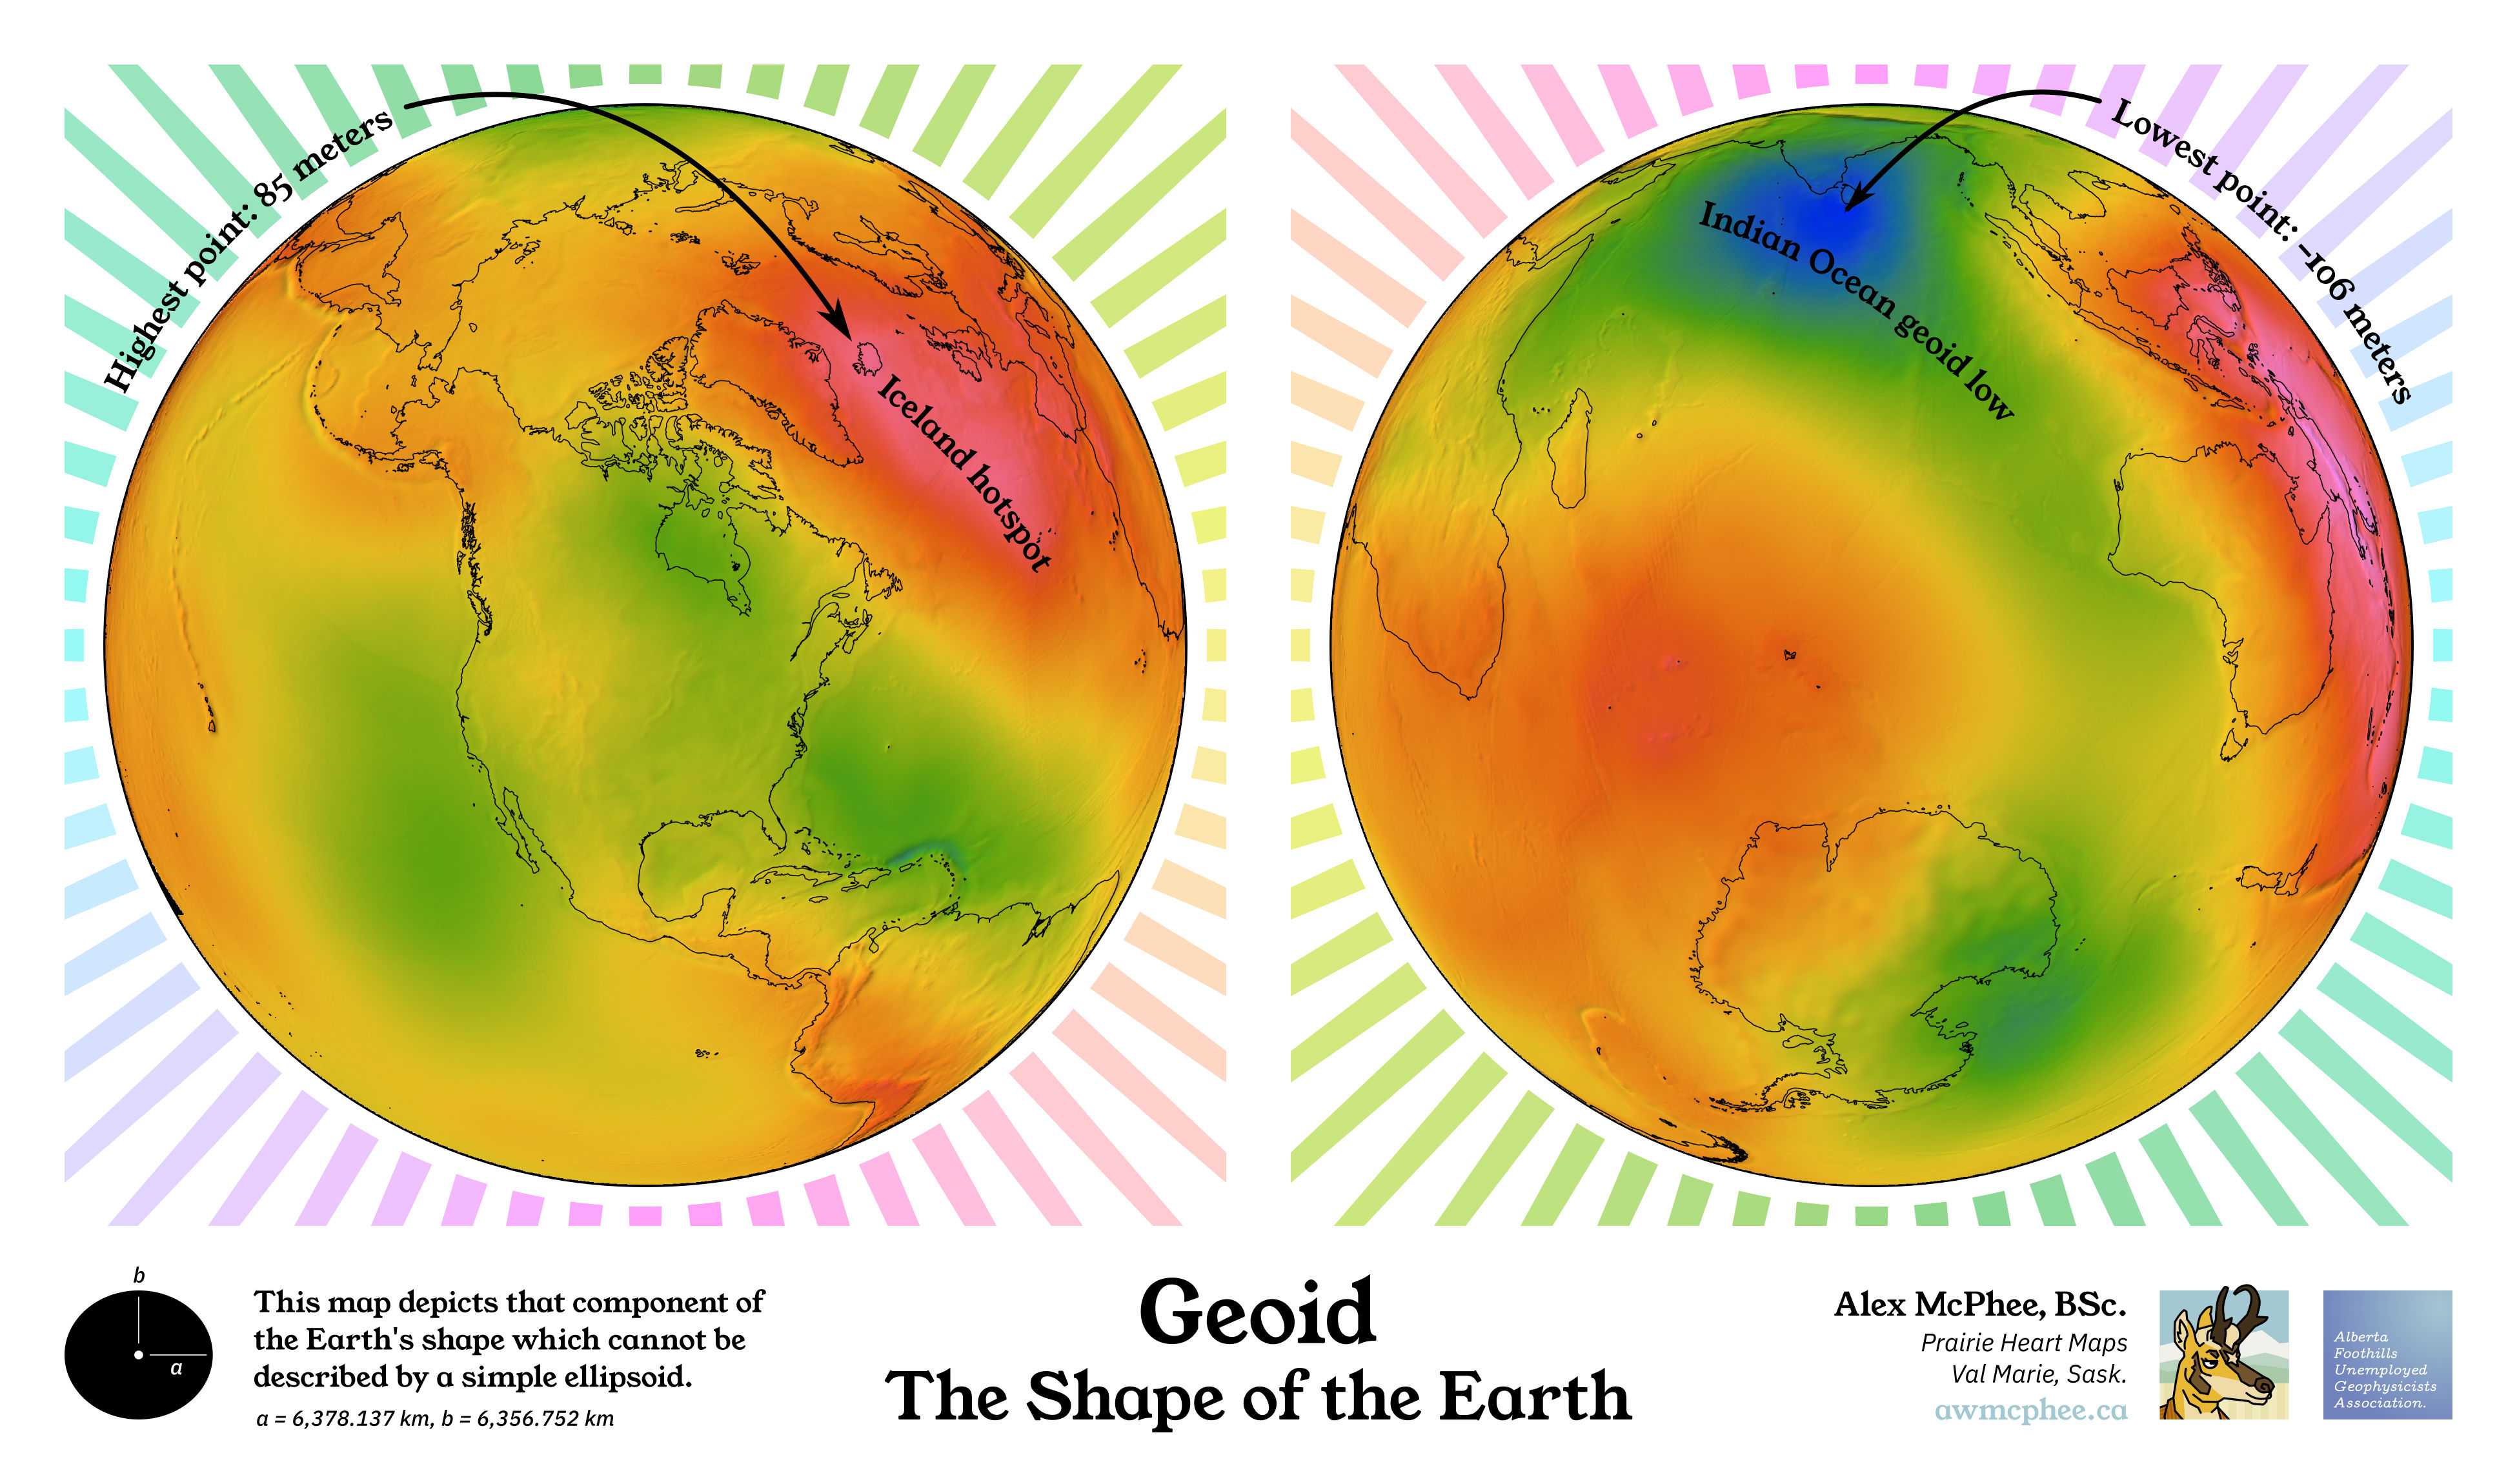 A map showing the elevation differences of the geoid, which is the shape of the Earth if it were all covered by water.